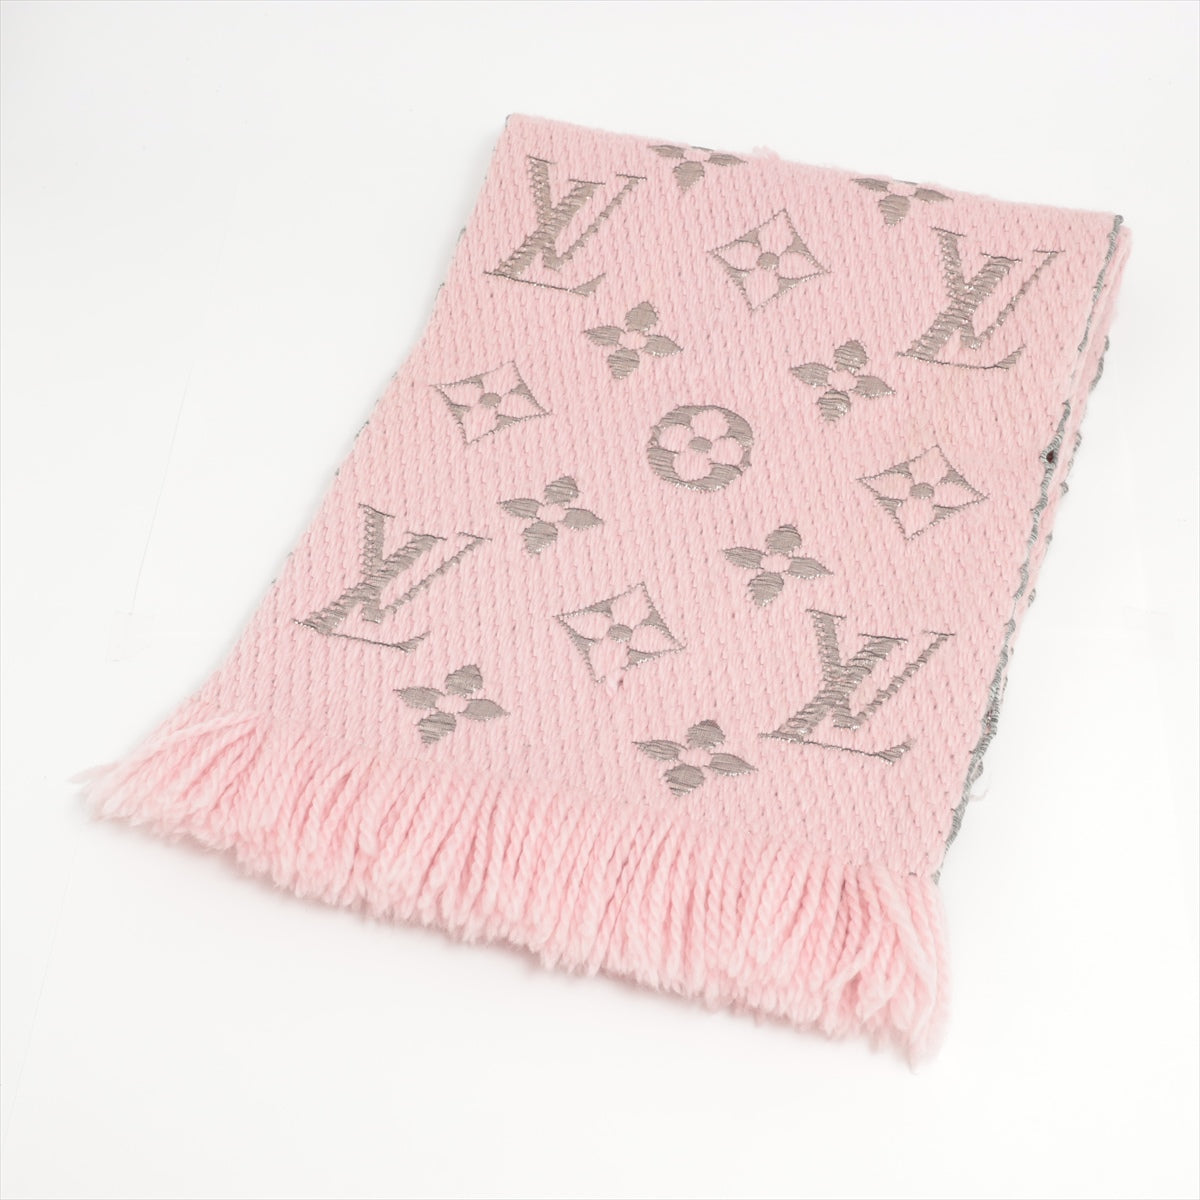 Logomania scarf in pink Size+-180+x+32+cm+ Choose+from+pink/Silver+or+Grey  See+our+store+for+other+colors…